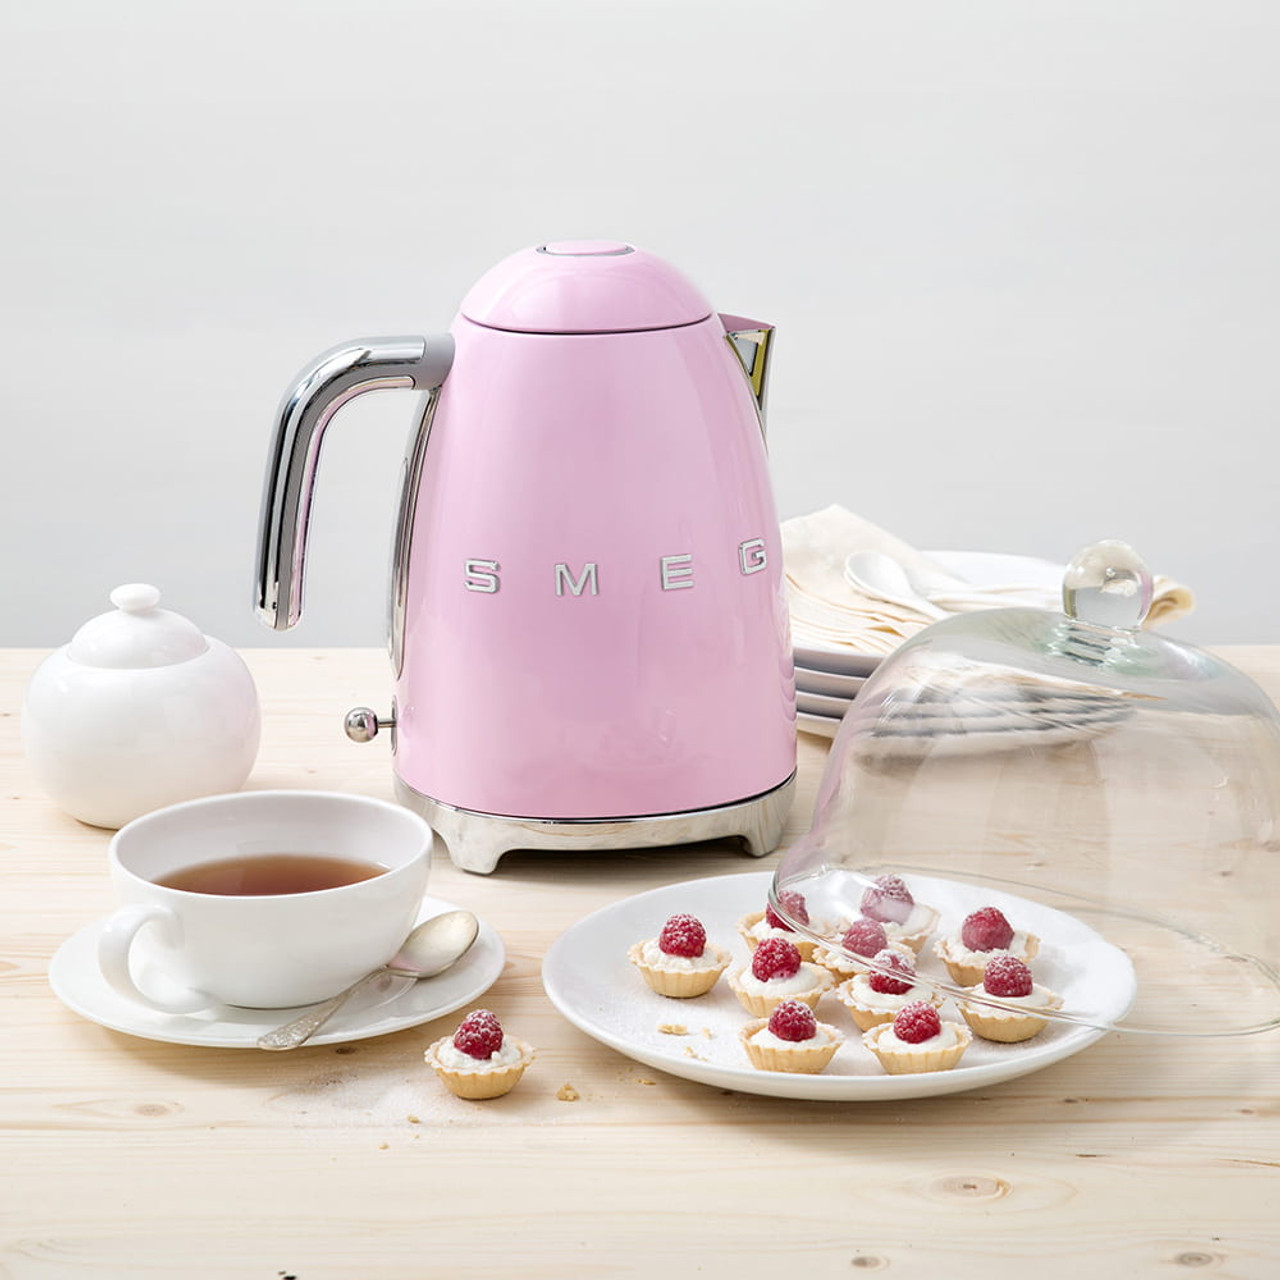 https://cdn11.bigcommerce.com/s-hccytny0od/images/stencil/1280x1280/products/2503/8610/smeg-electric-kettle-2__85406.1591282386.jpg?c=2?imbypass=on